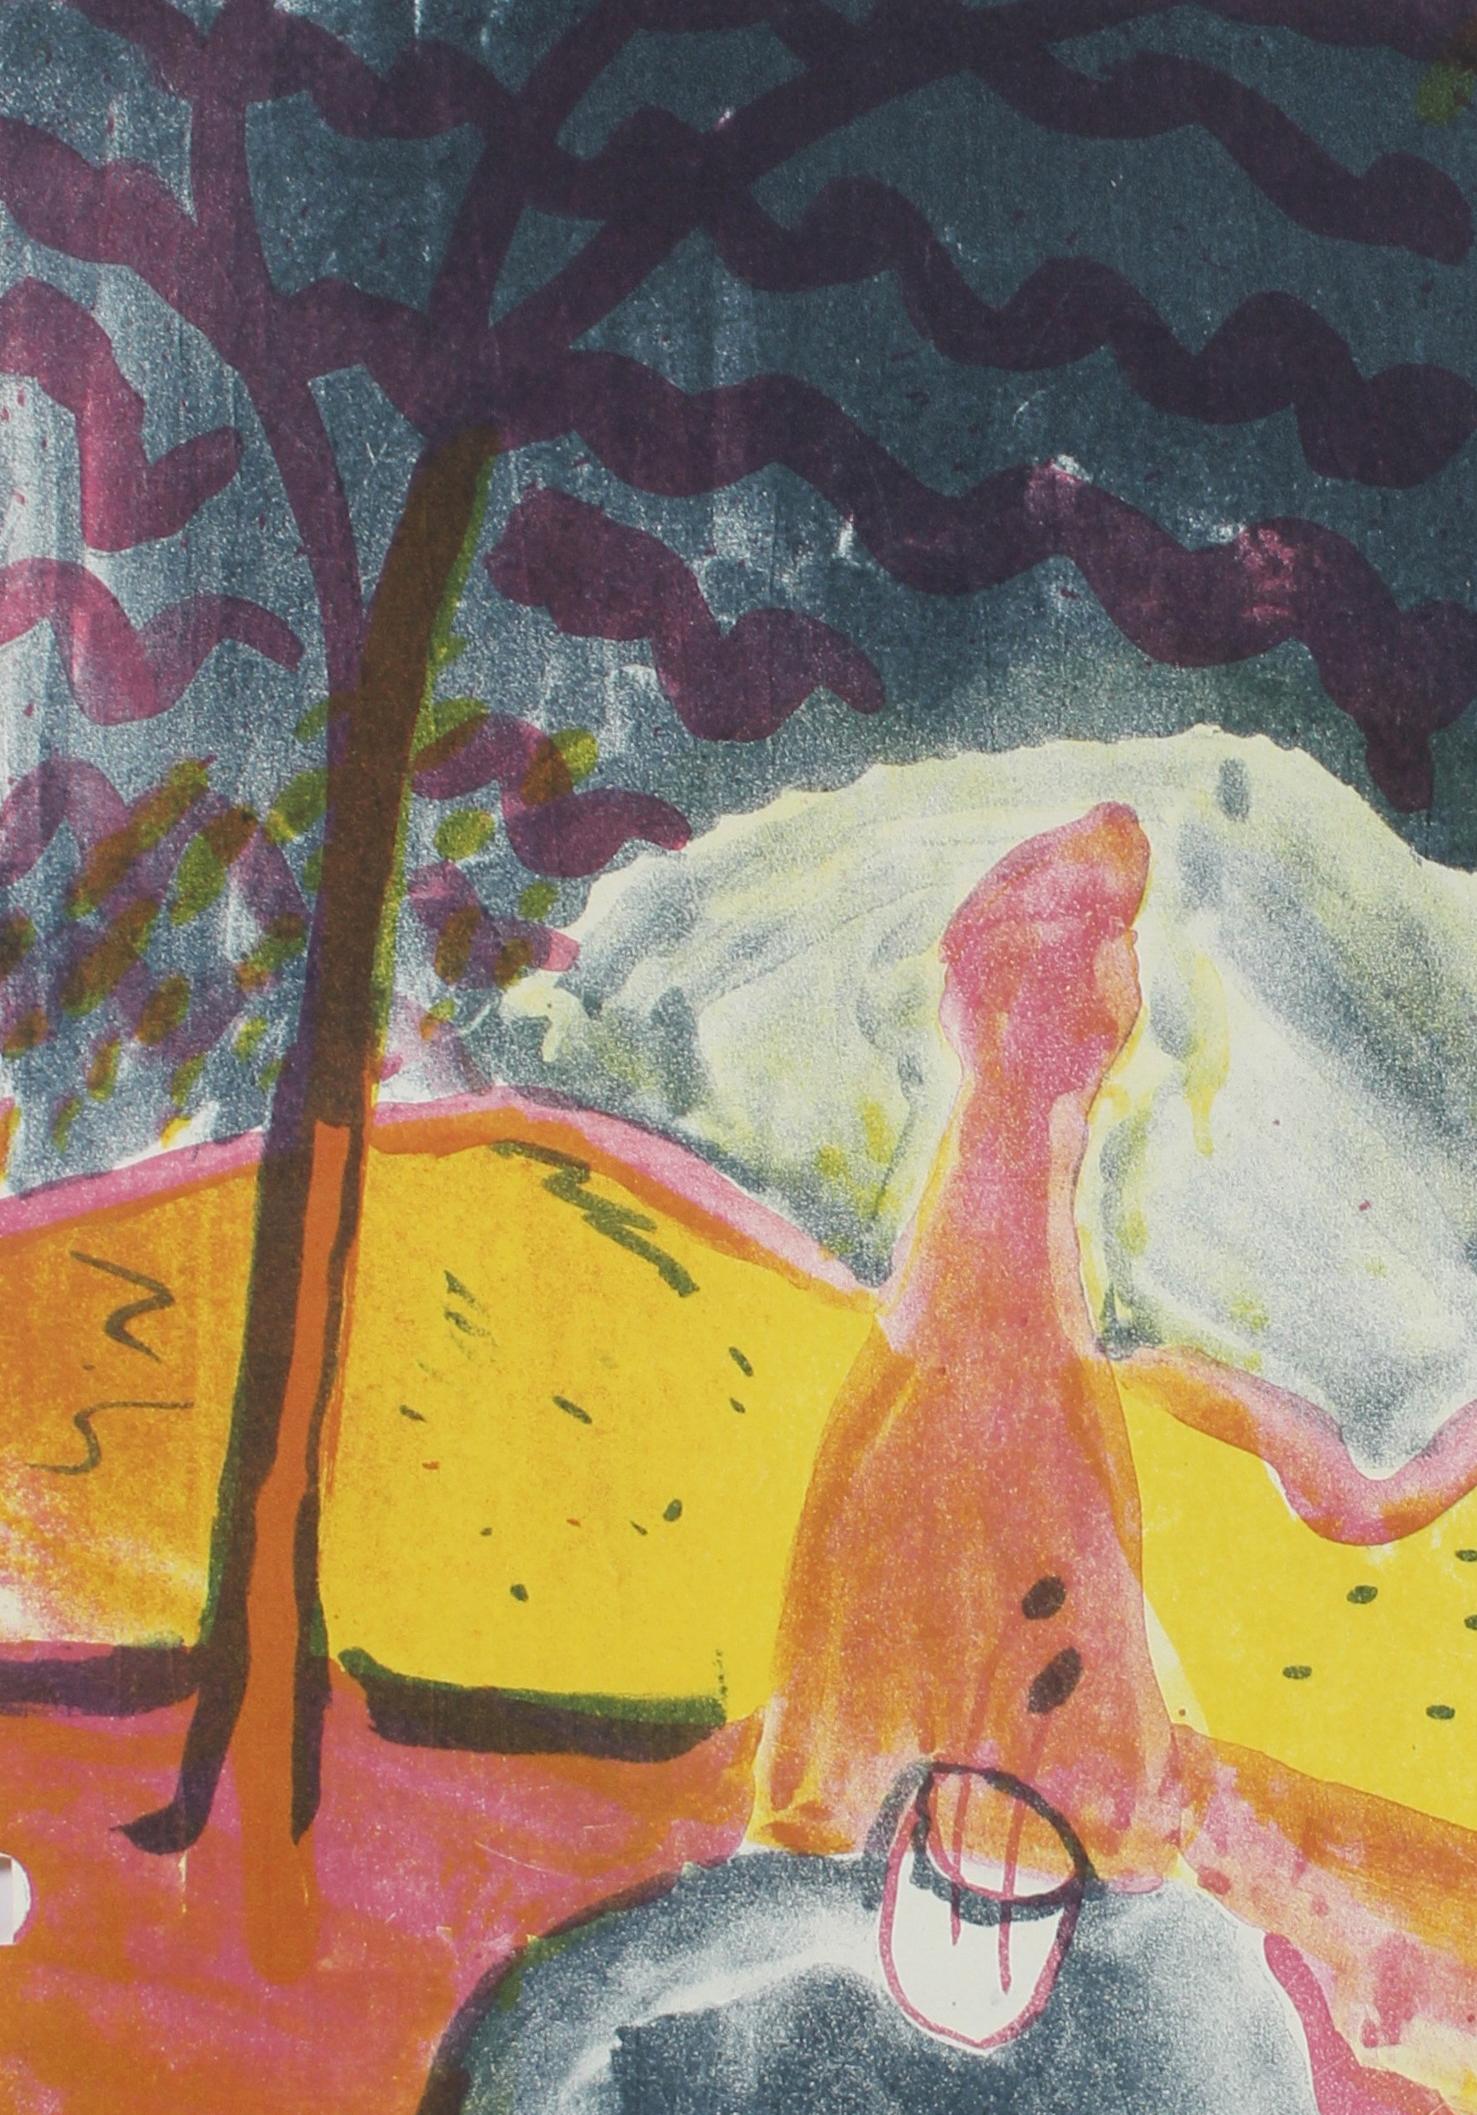 Colorful Abstracted Landscape Lithograph on Paper with Pink and Yellow, 1952 - Print by Michael L. Mason